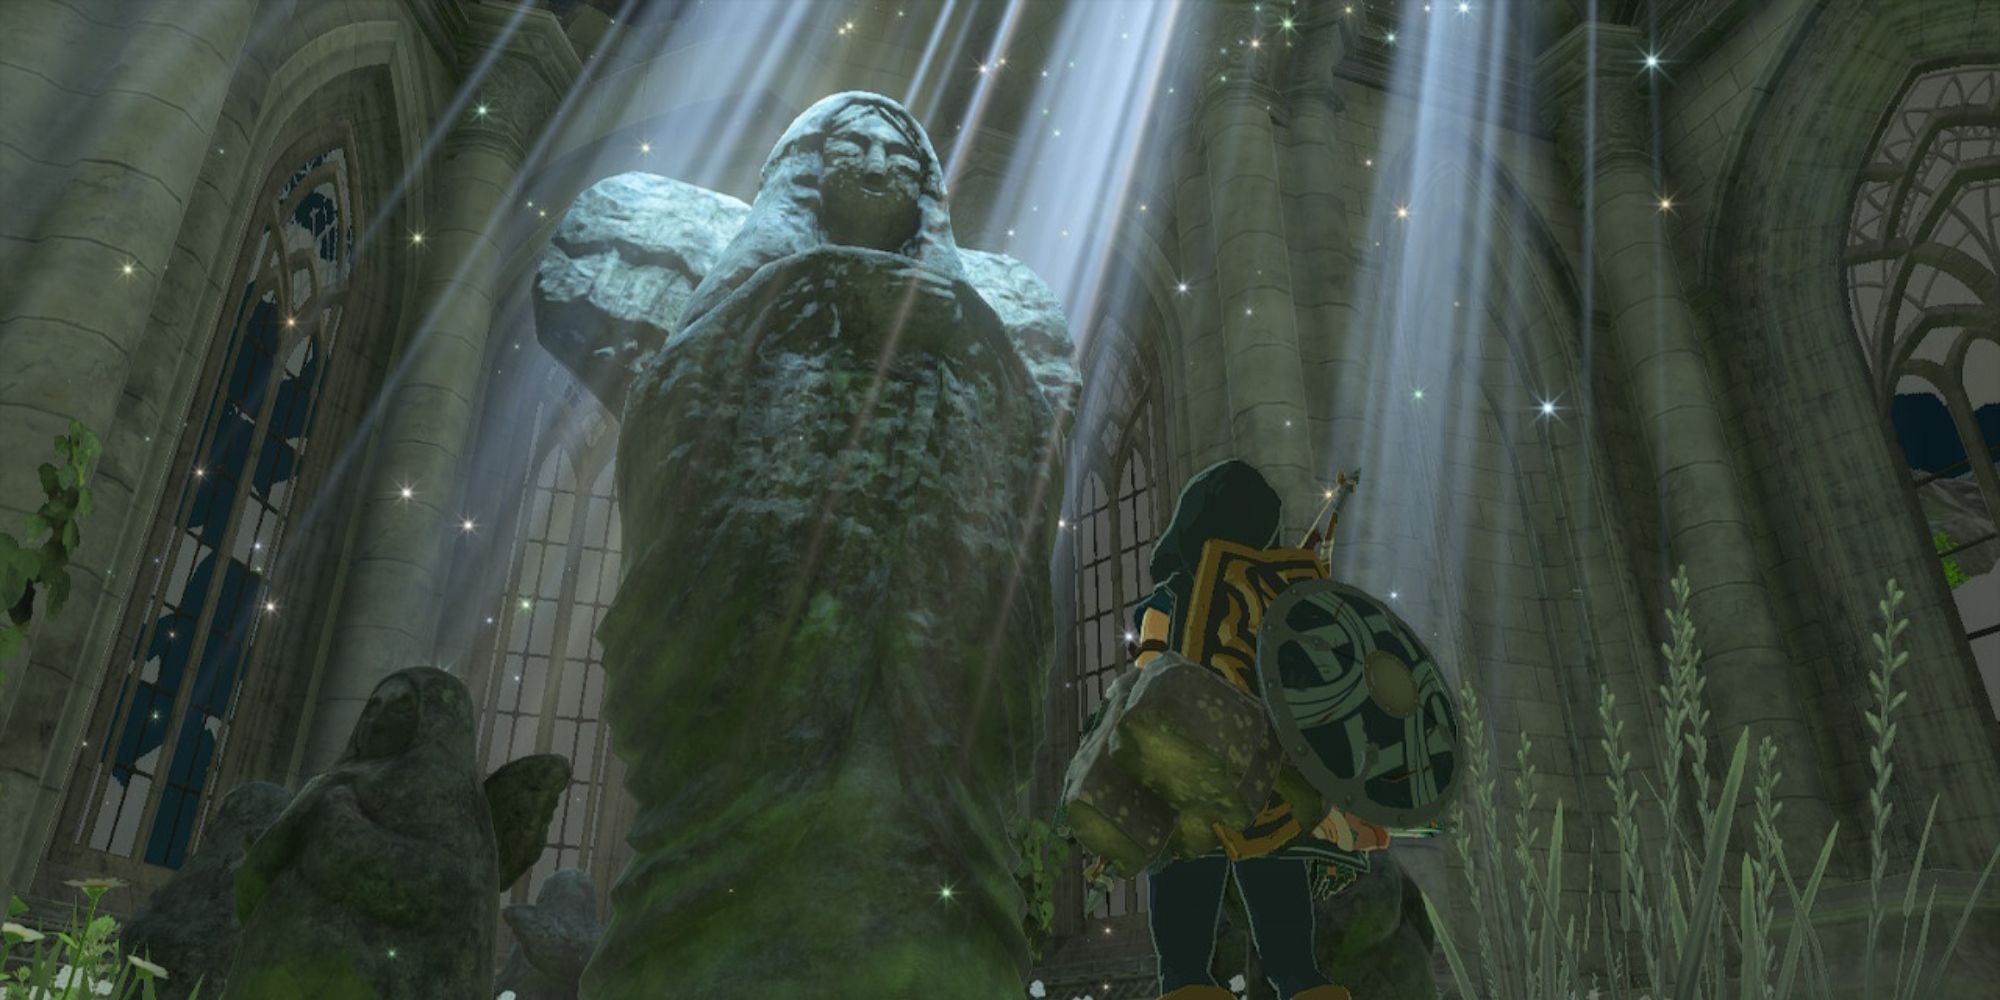 Link approaching the Goddess Statue in the Temple of Time